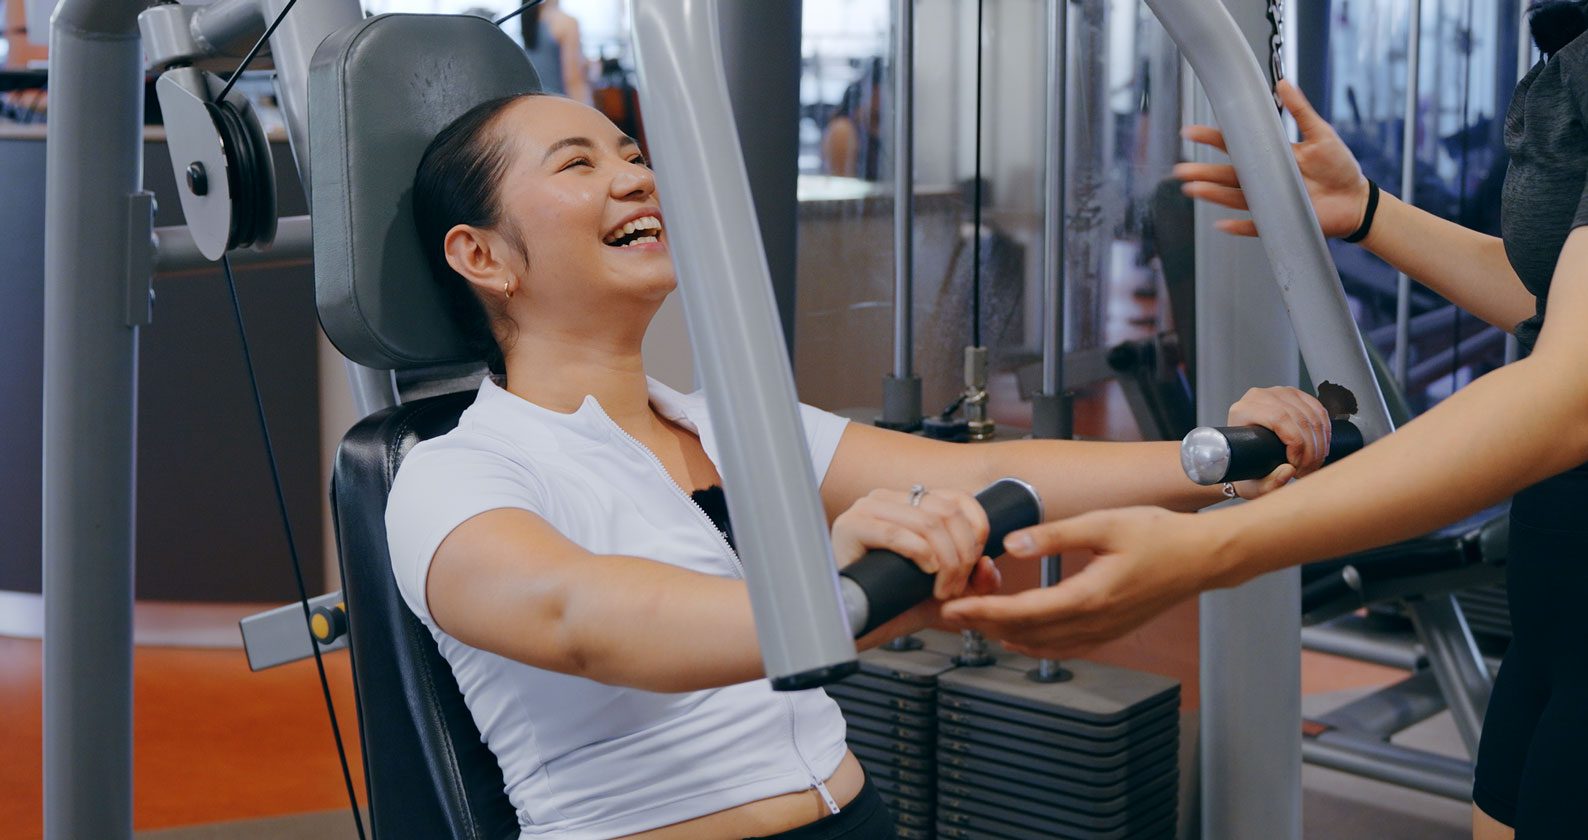 Celena is laughing while on a gym machine. She wears workout gear.